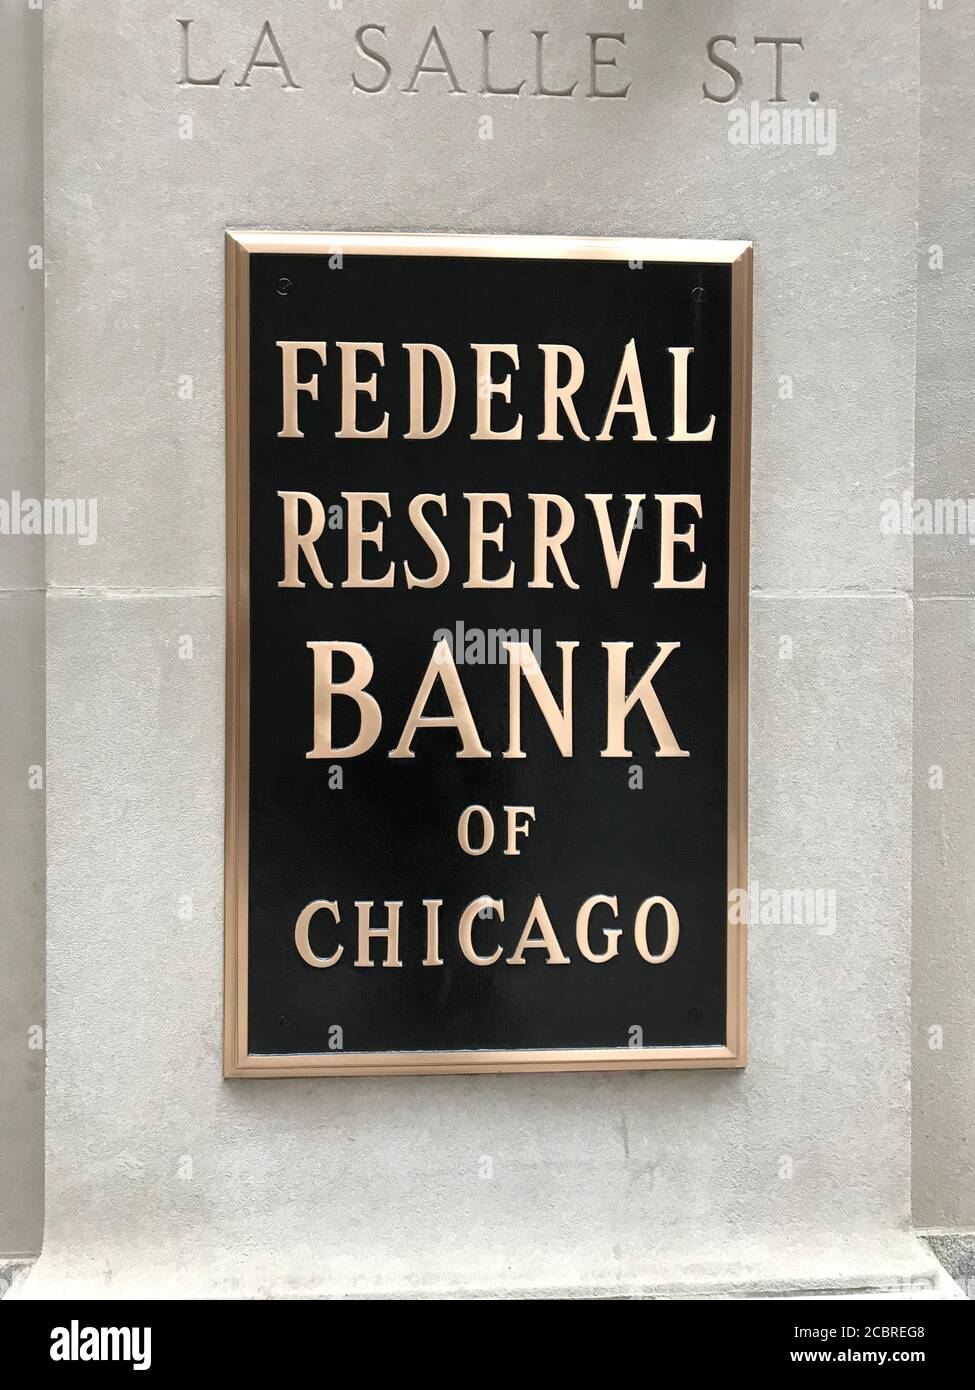 Federal Reserve Bank of Chicago sign on building. Chicago, Illinois / United States. Stock Photo